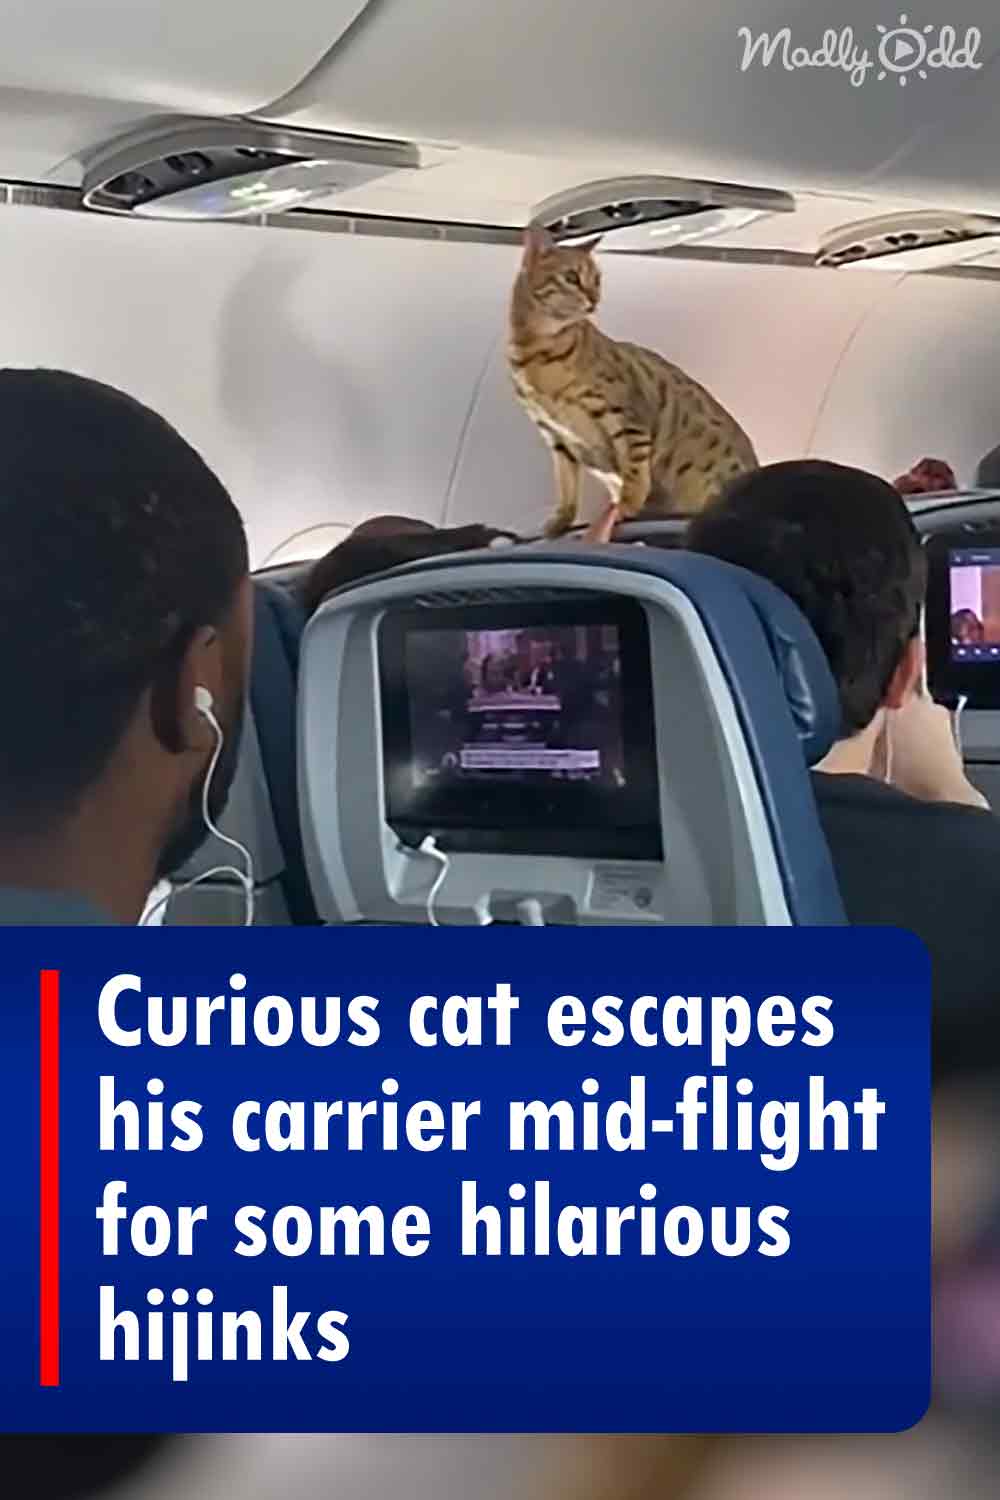 Curious cat escapes his carrier mid-flight for some hilarious hijinks